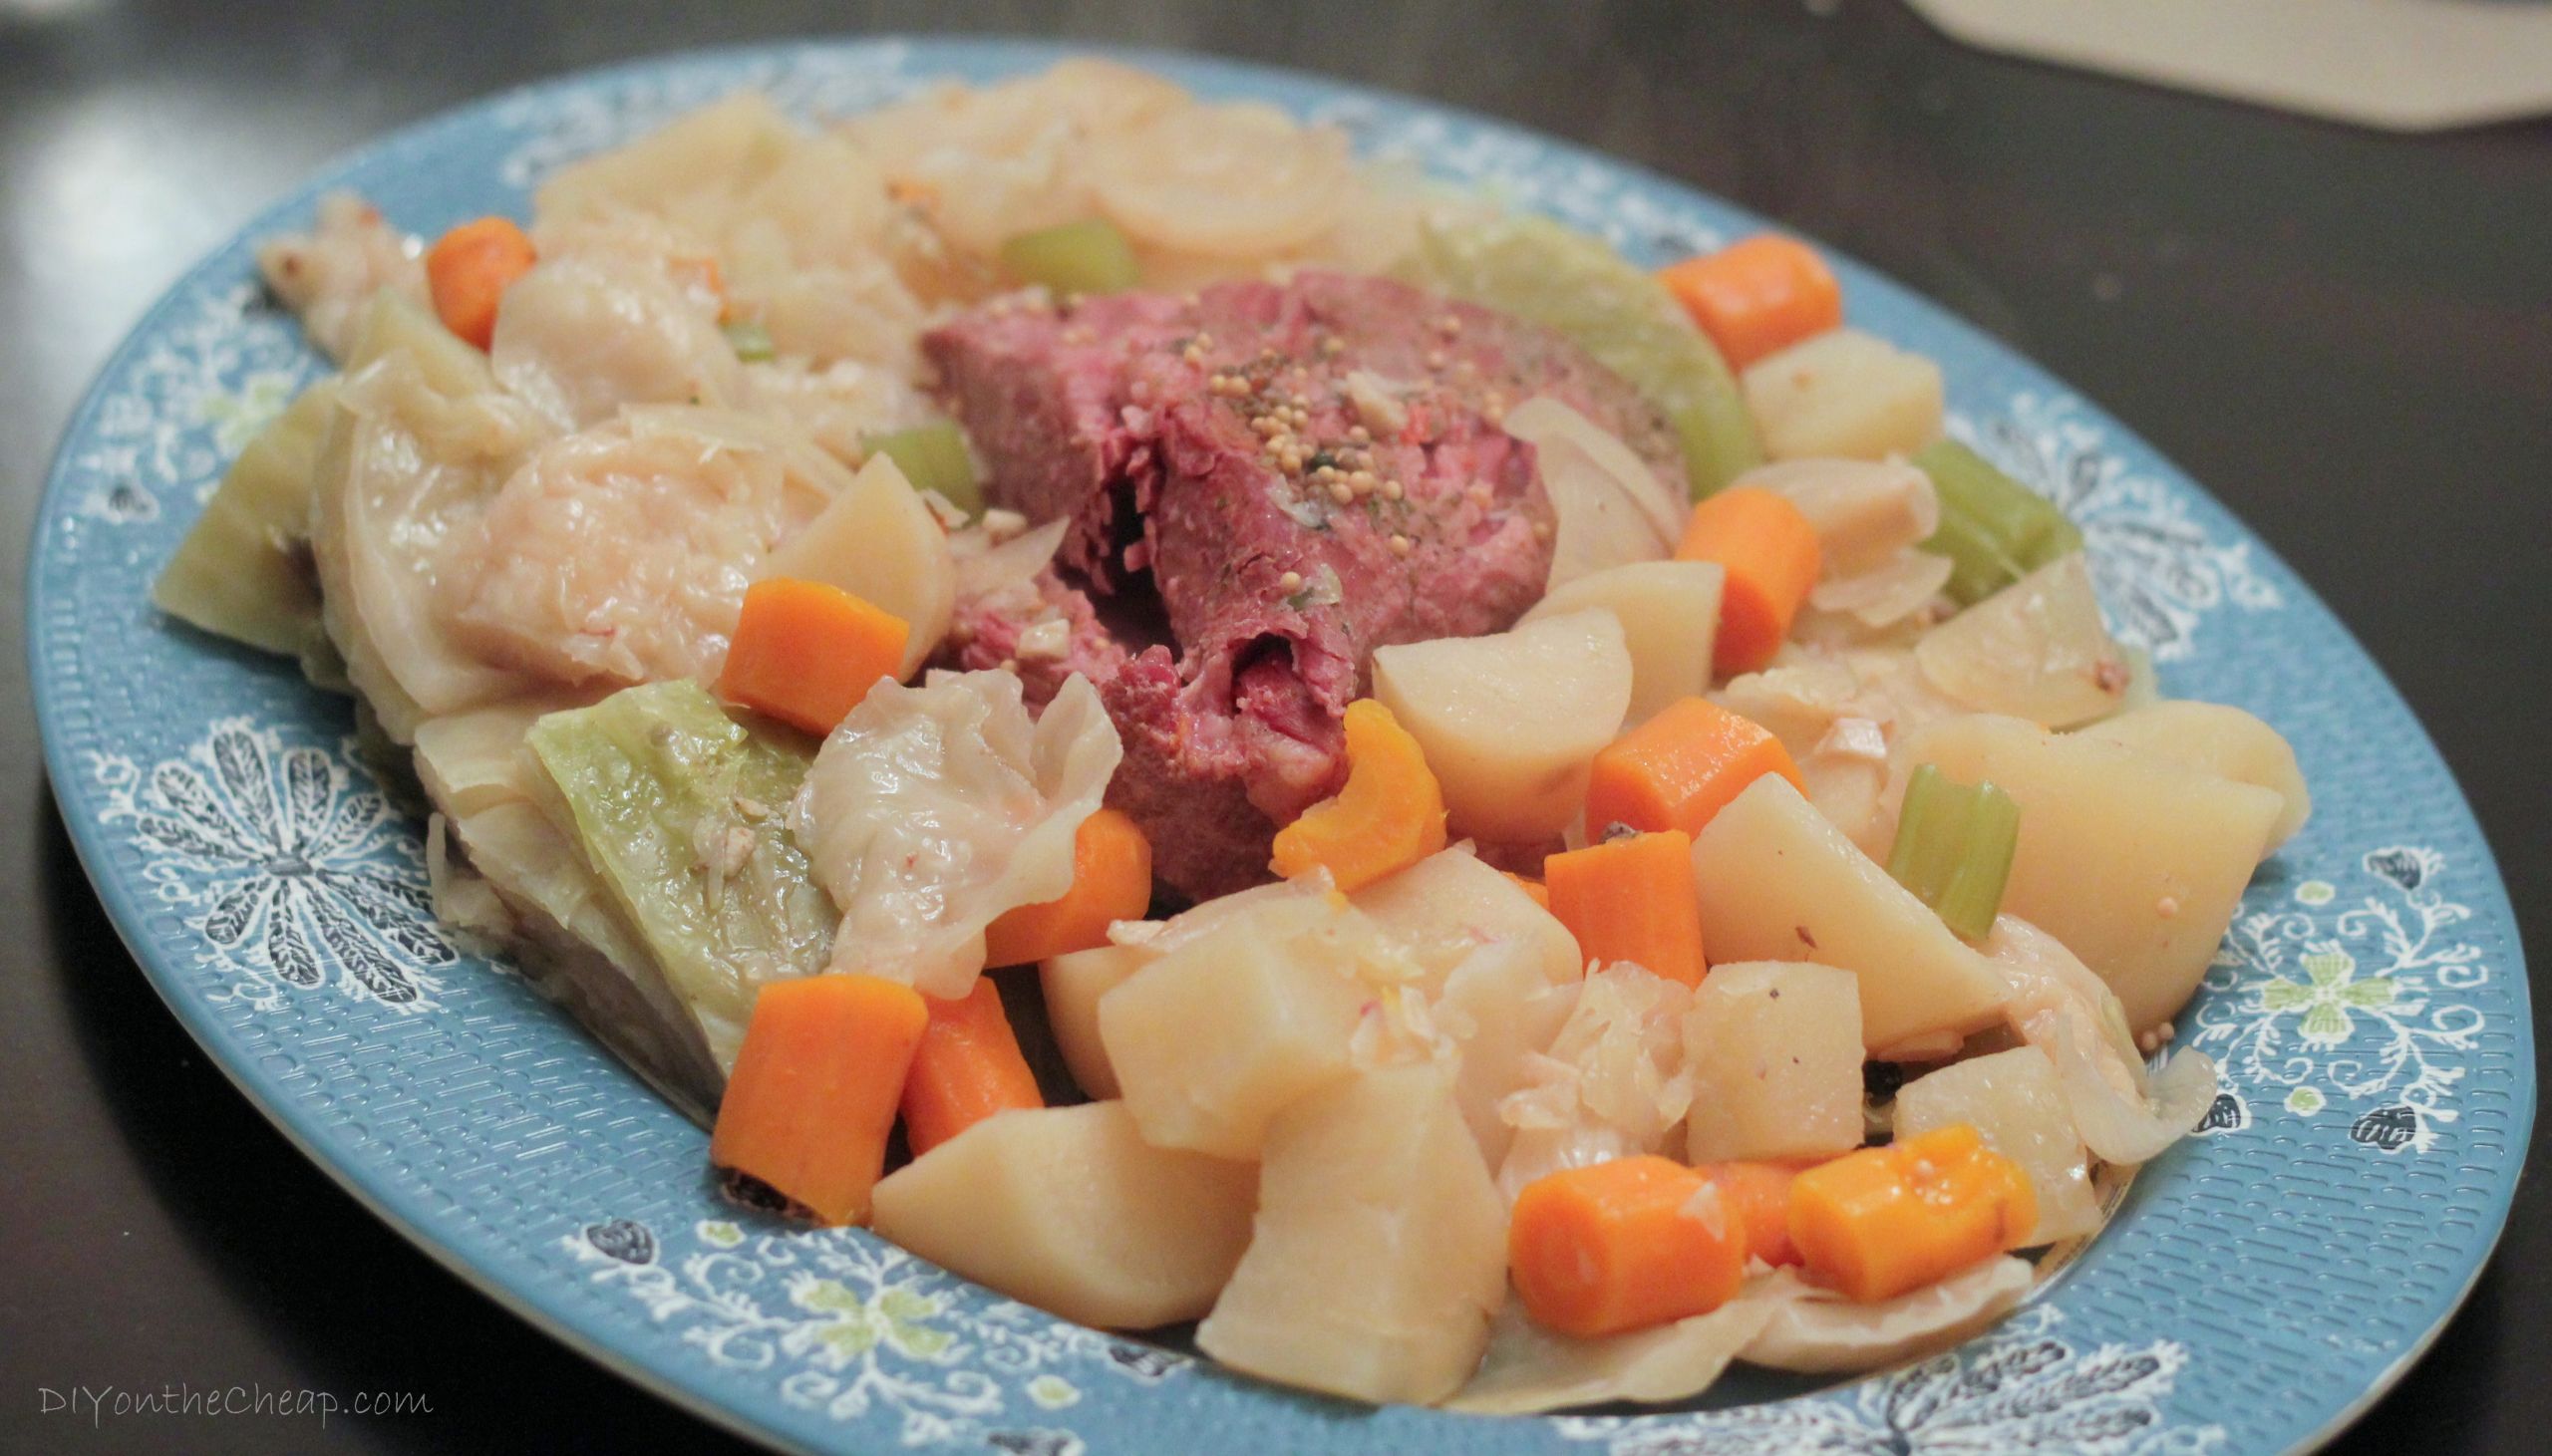 Cabbage New Years
 New Years Slow Cooker Corned Beef & Cabbage Free